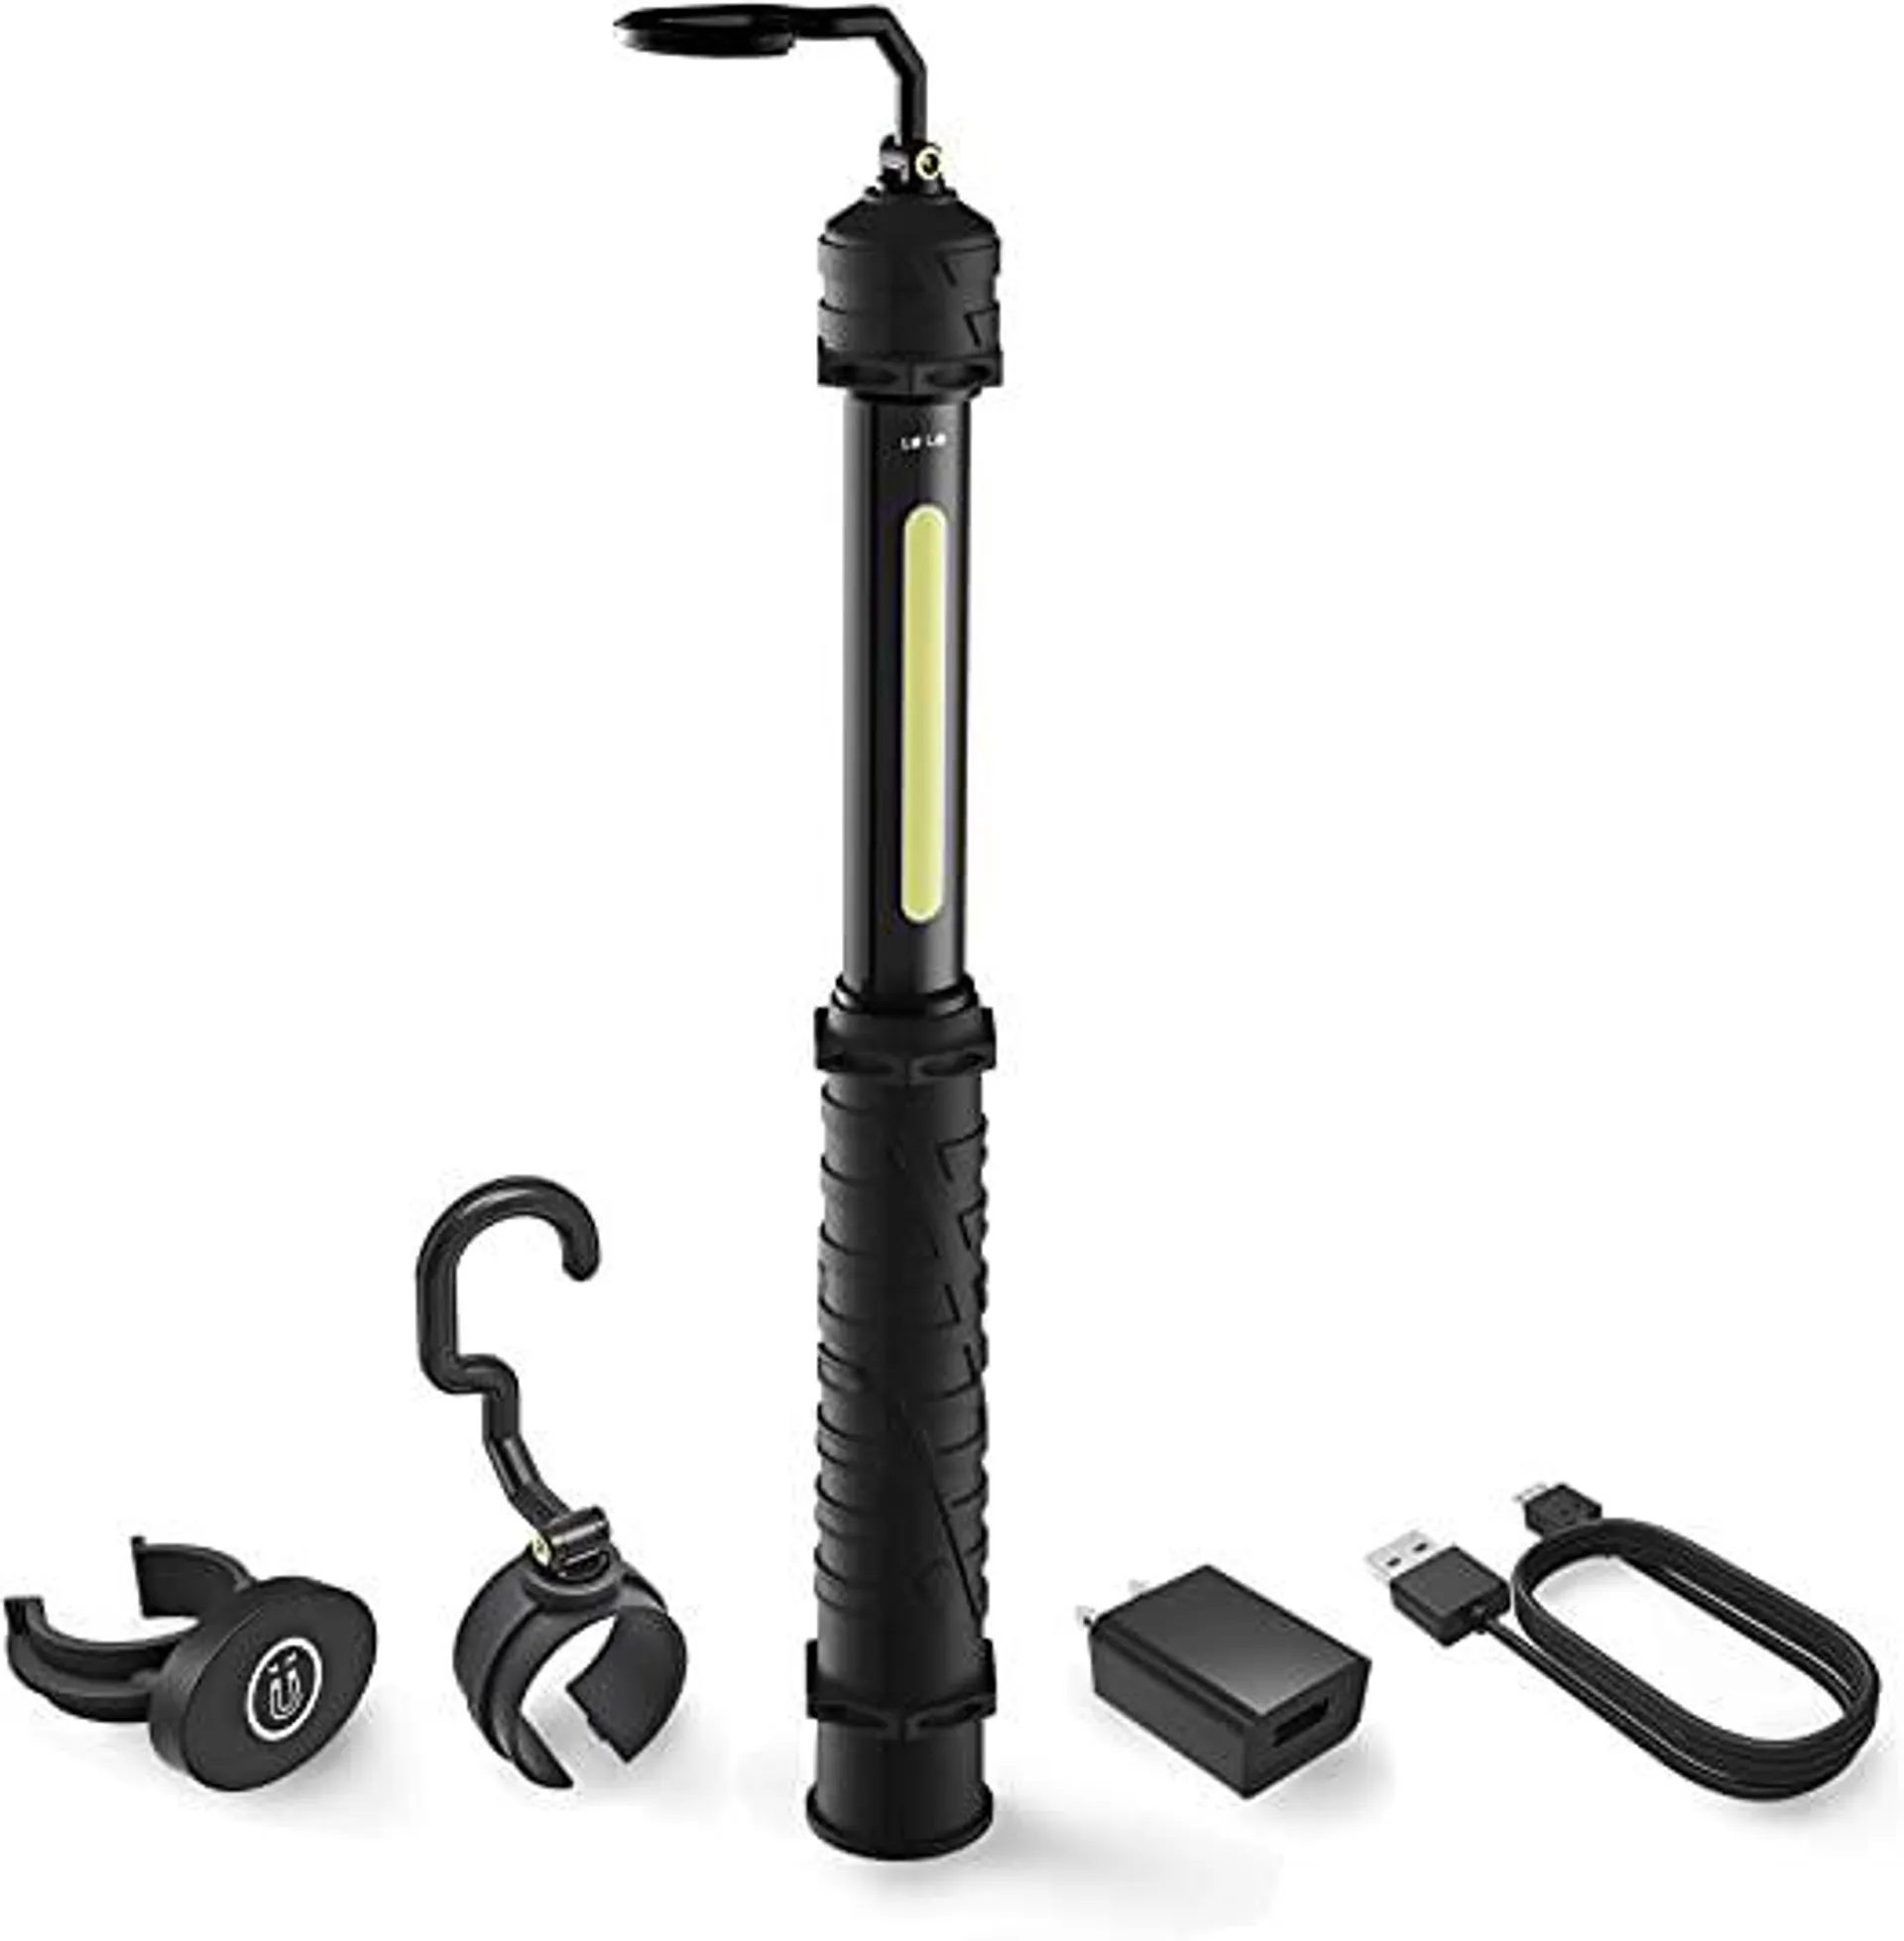 NEIKO 40339A Cordless COB LED Work Light with Rechargeable 4,400-mAh Li-ion Battery, Up to 11.5 Hours of Run Time, and Max Brightness of 700 Lumens, Black